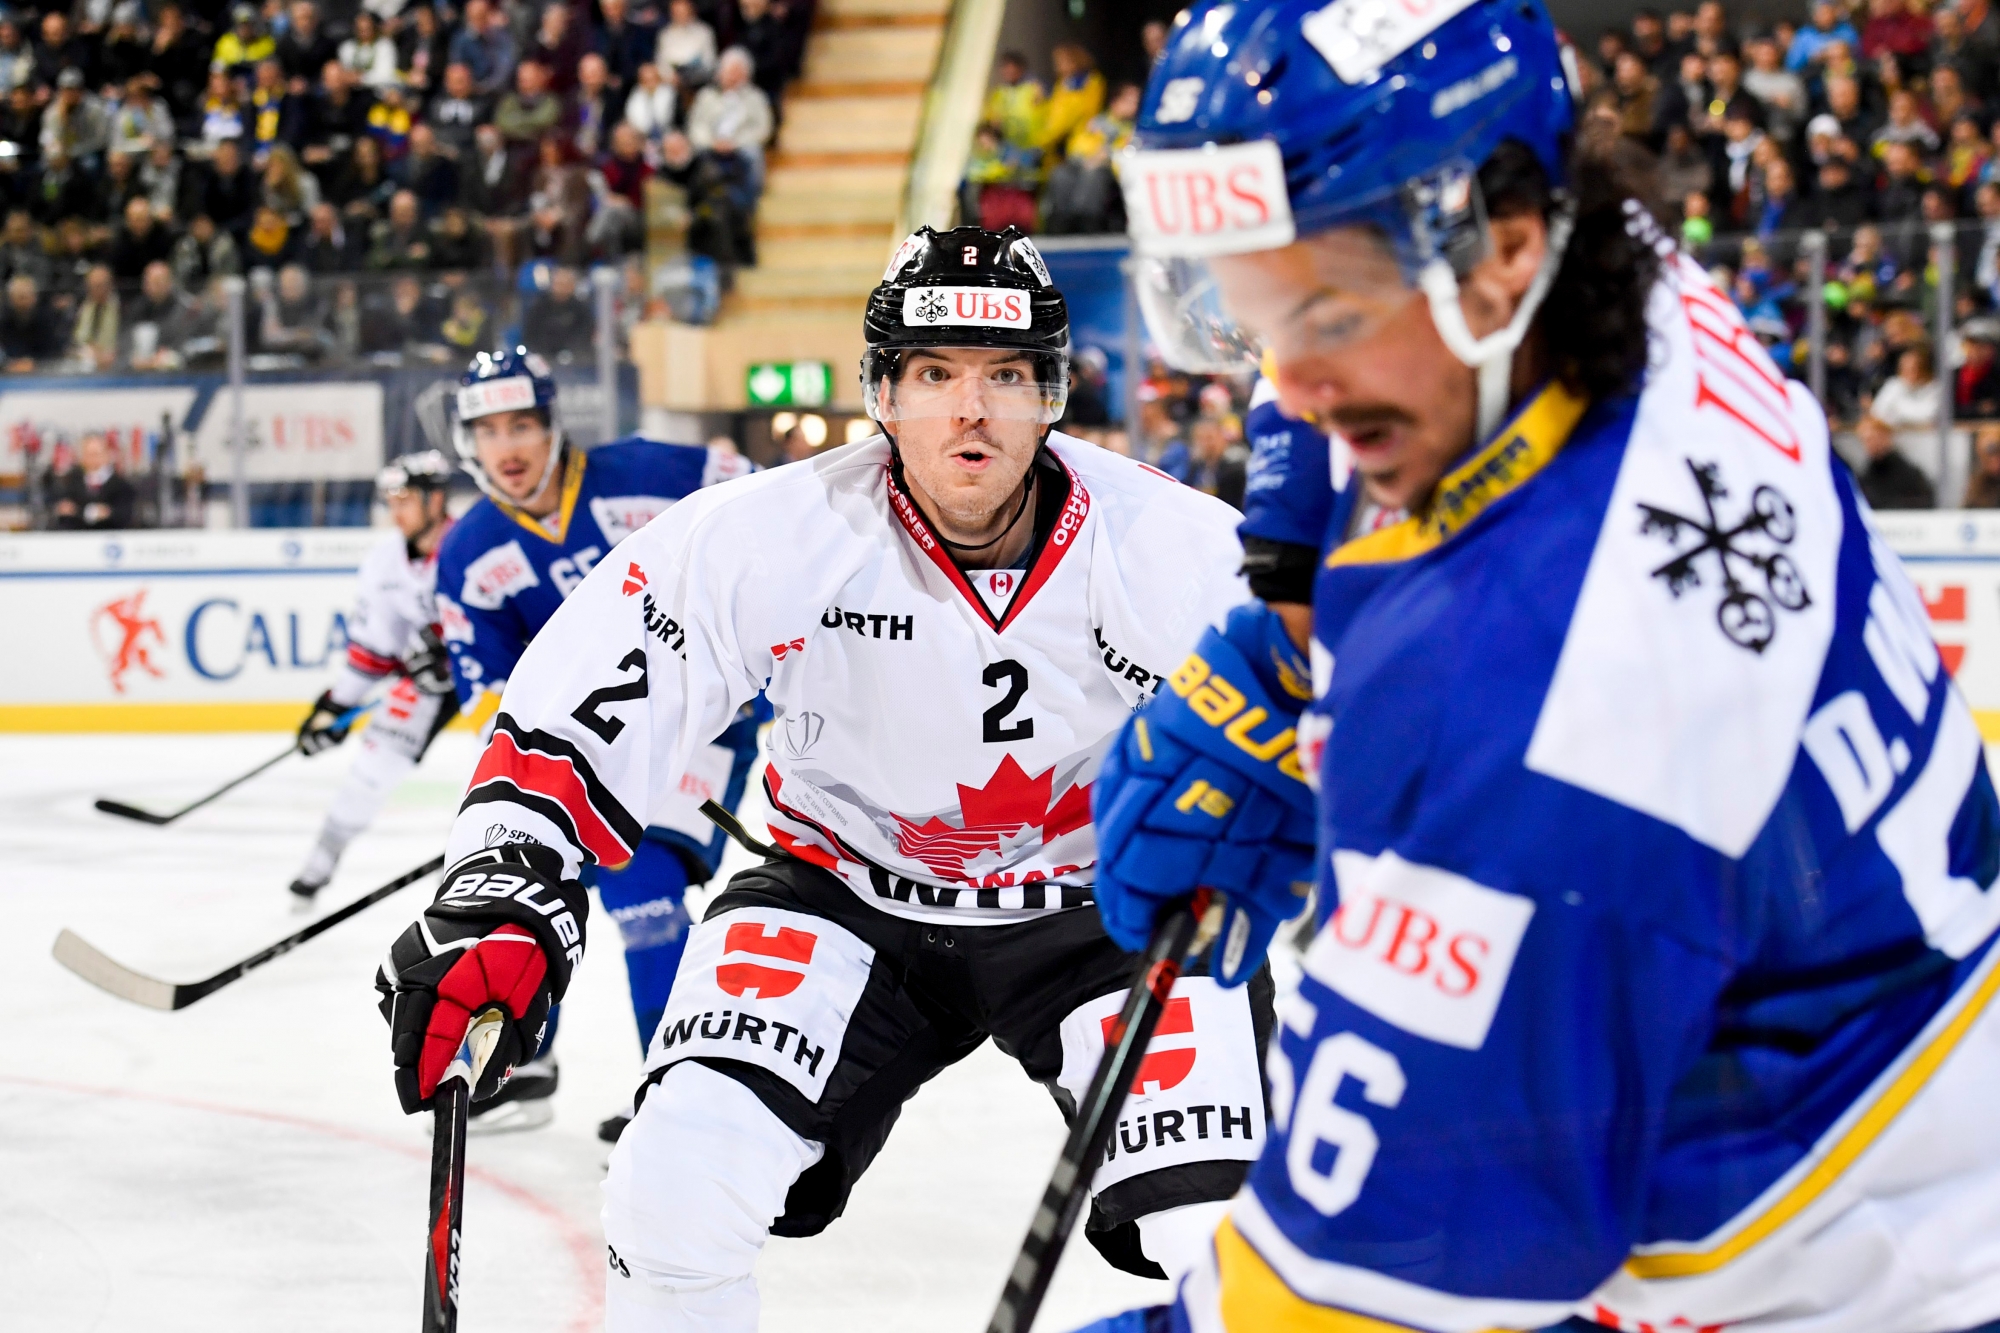 Team Canada's Simon Despres, center, during the game between HC Davos and Team Canada, at the 92th Spengler Cup ice hockey tournament in Davos, Switzerland, Wednesday, December 26, 2018. (KEYSTONE/Gian Ehrenzeller). EISHOCKEY SPENGLER CUP 2018 DAVOS CANADA